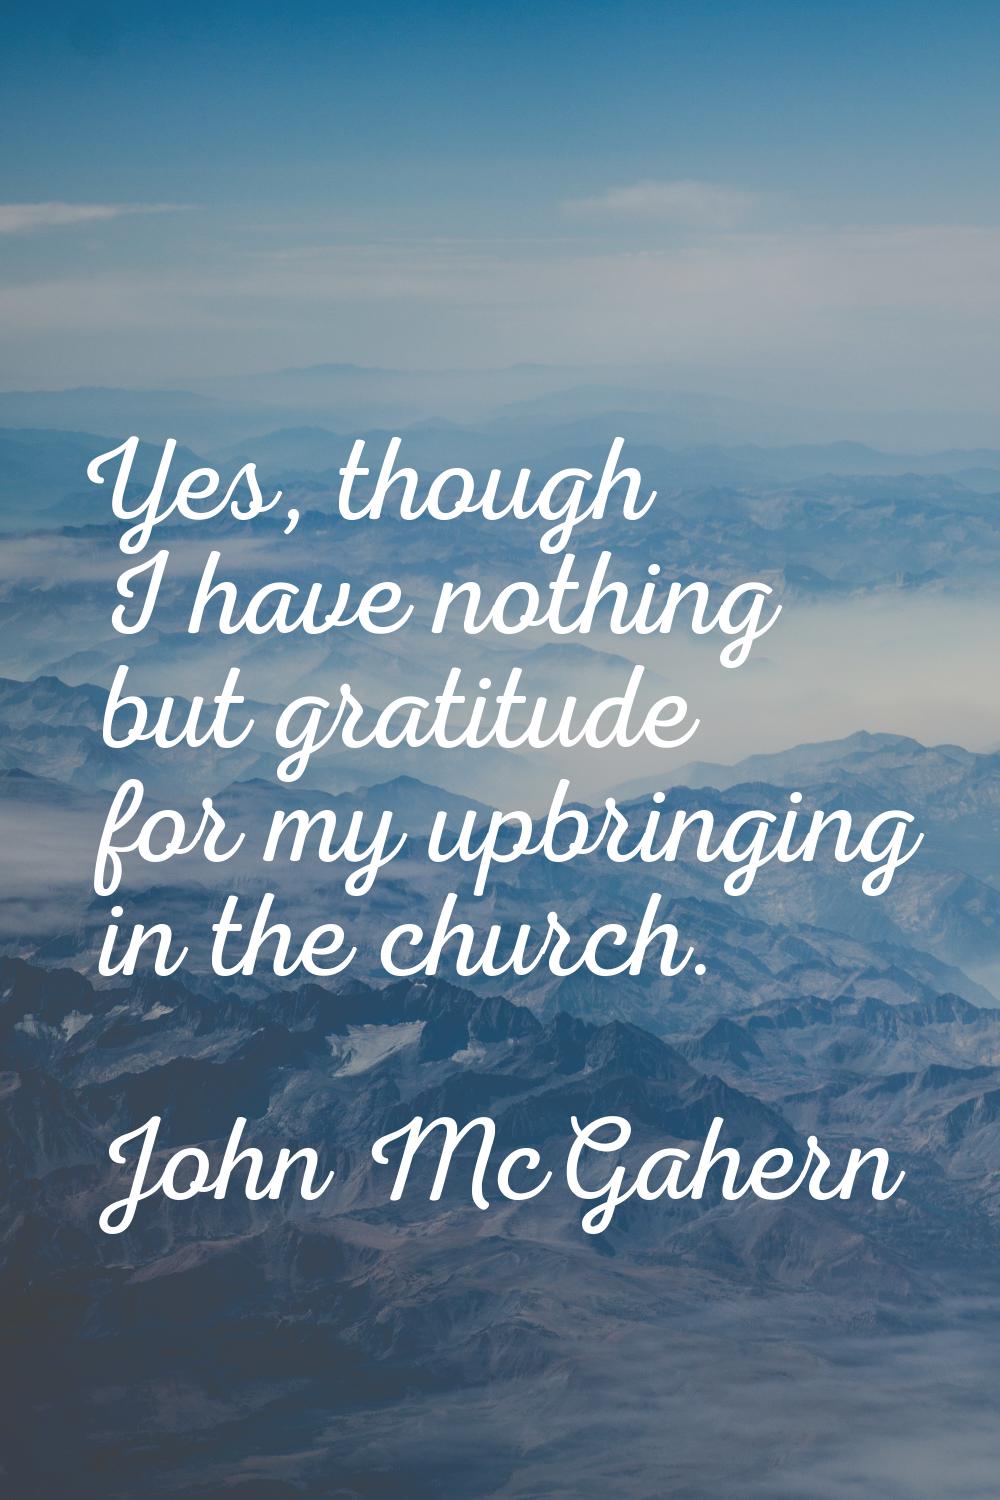 Yes, though I have nothing but gratitude for my upbringing in the church.